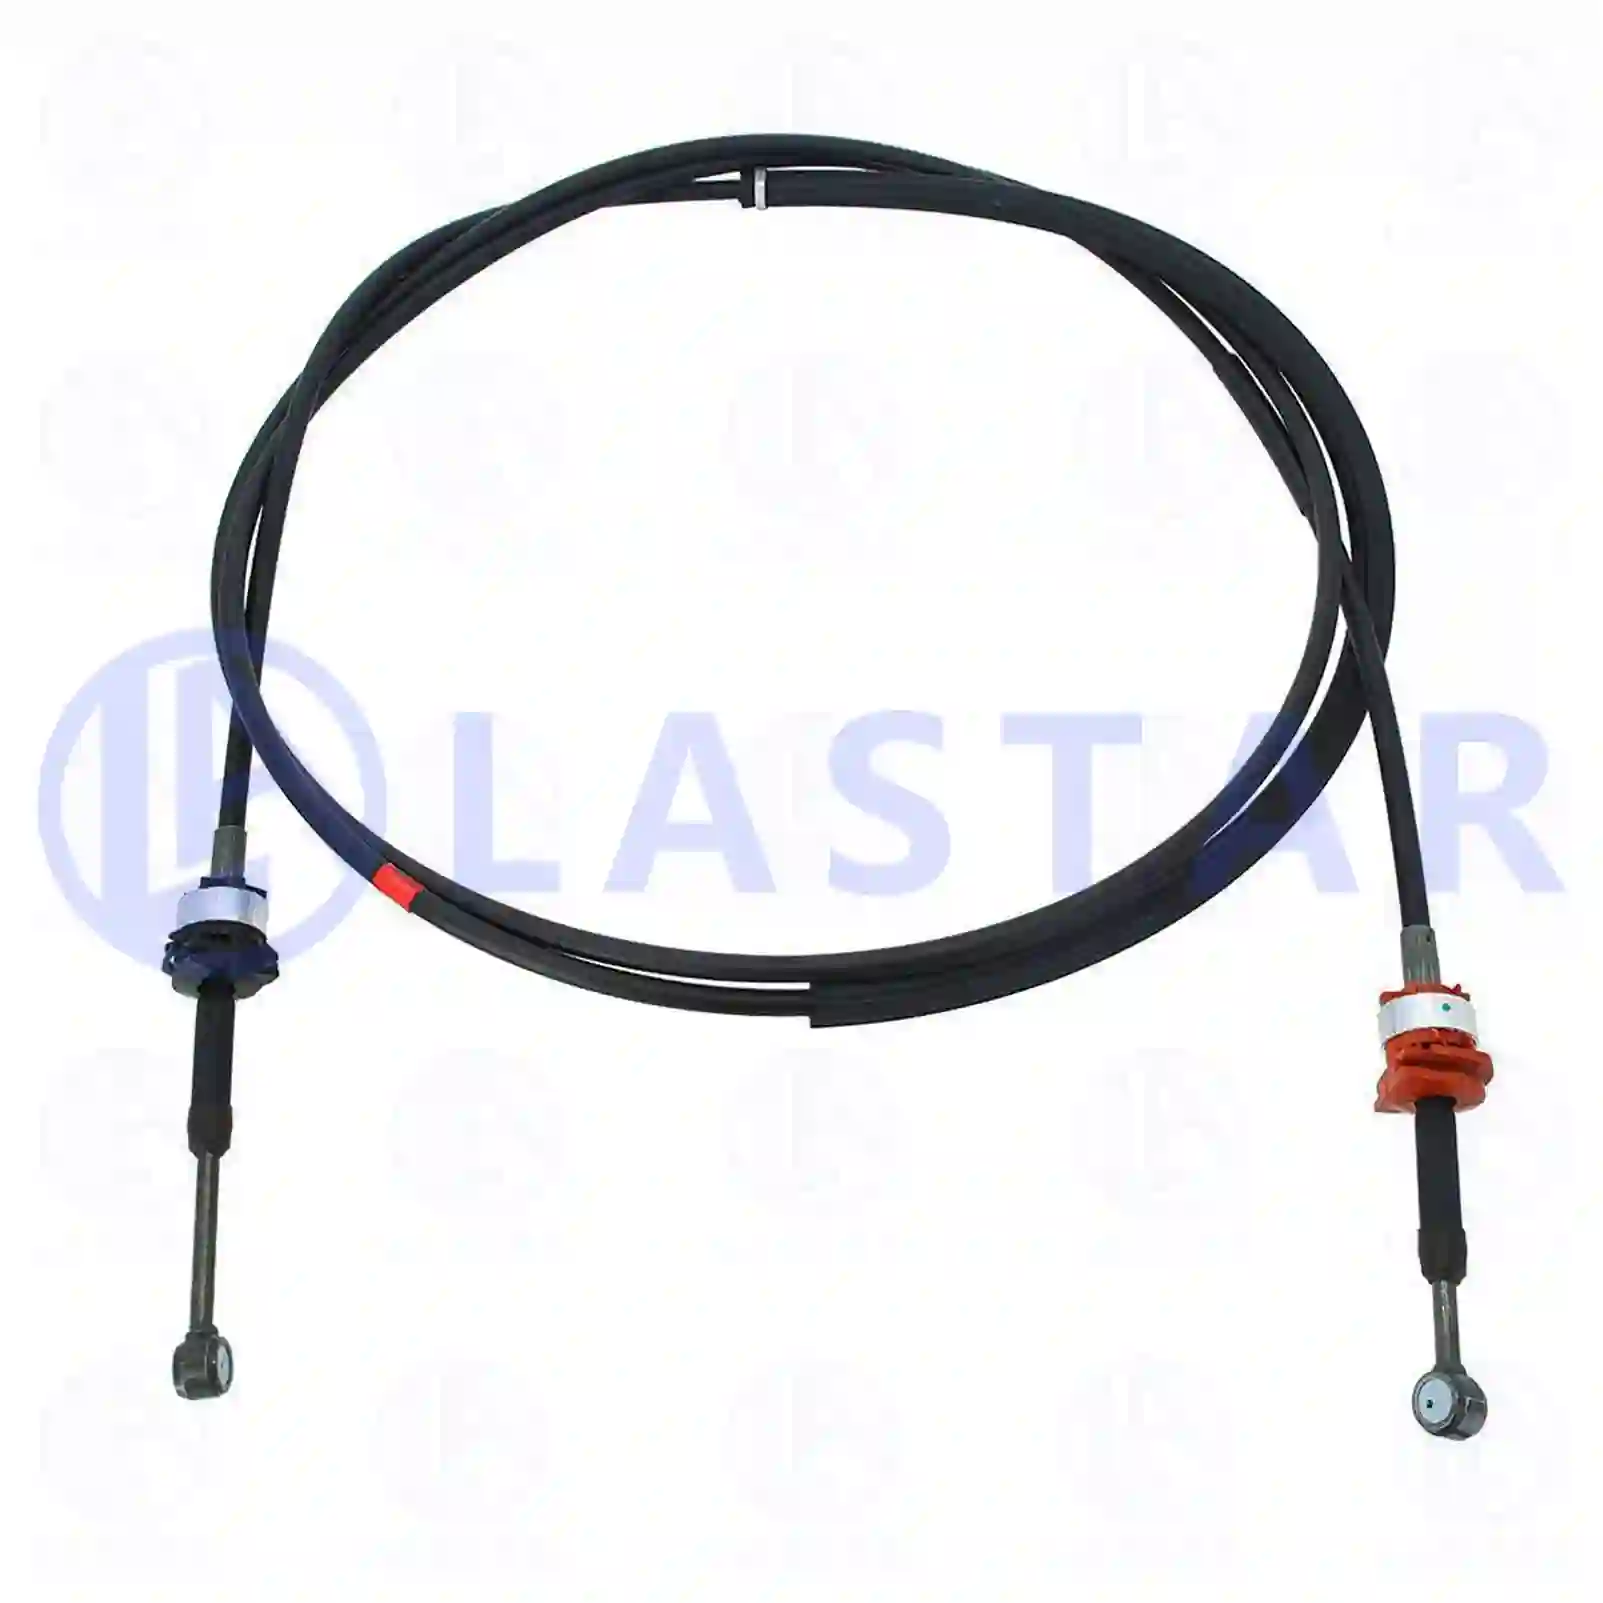 Control cable, switching, 77732687, 21002882, 2178971 ||  77732687 Lastar Spare Part | Truck Spare Parts, Auotomotive Spare Parts Control cable, switching, 77732687, 21002882, 2178971 ||  77732687 Lastar Spare Part | Truck Spare Parts, Auotomotive Spare Parts